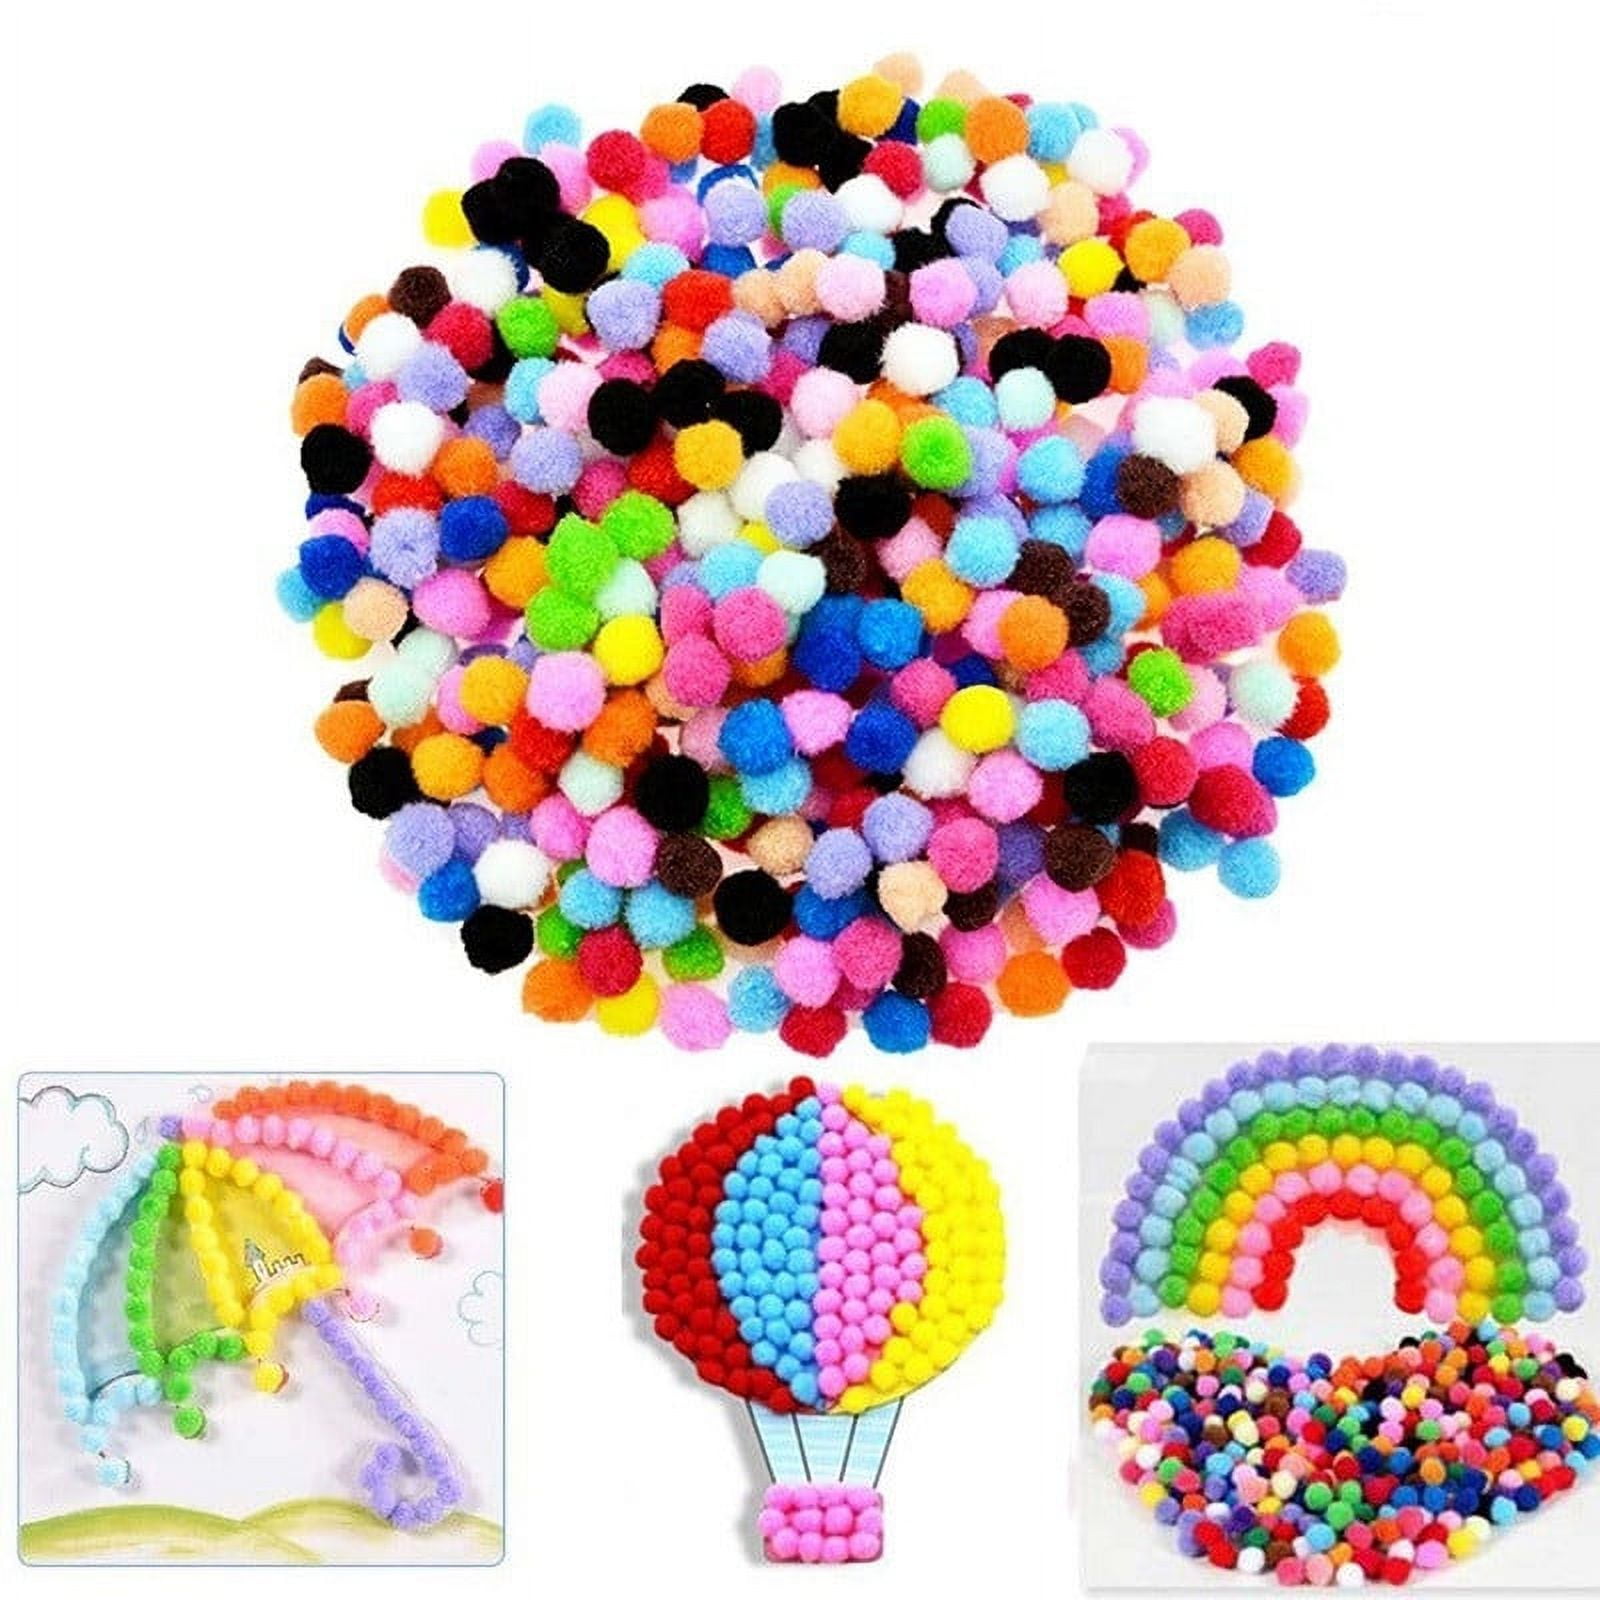 120pcs Assorted Sizes & Colors Craft Pom Poms Balls for Hobby Supplies and DIY Creative Crafts Party Decorations (03)